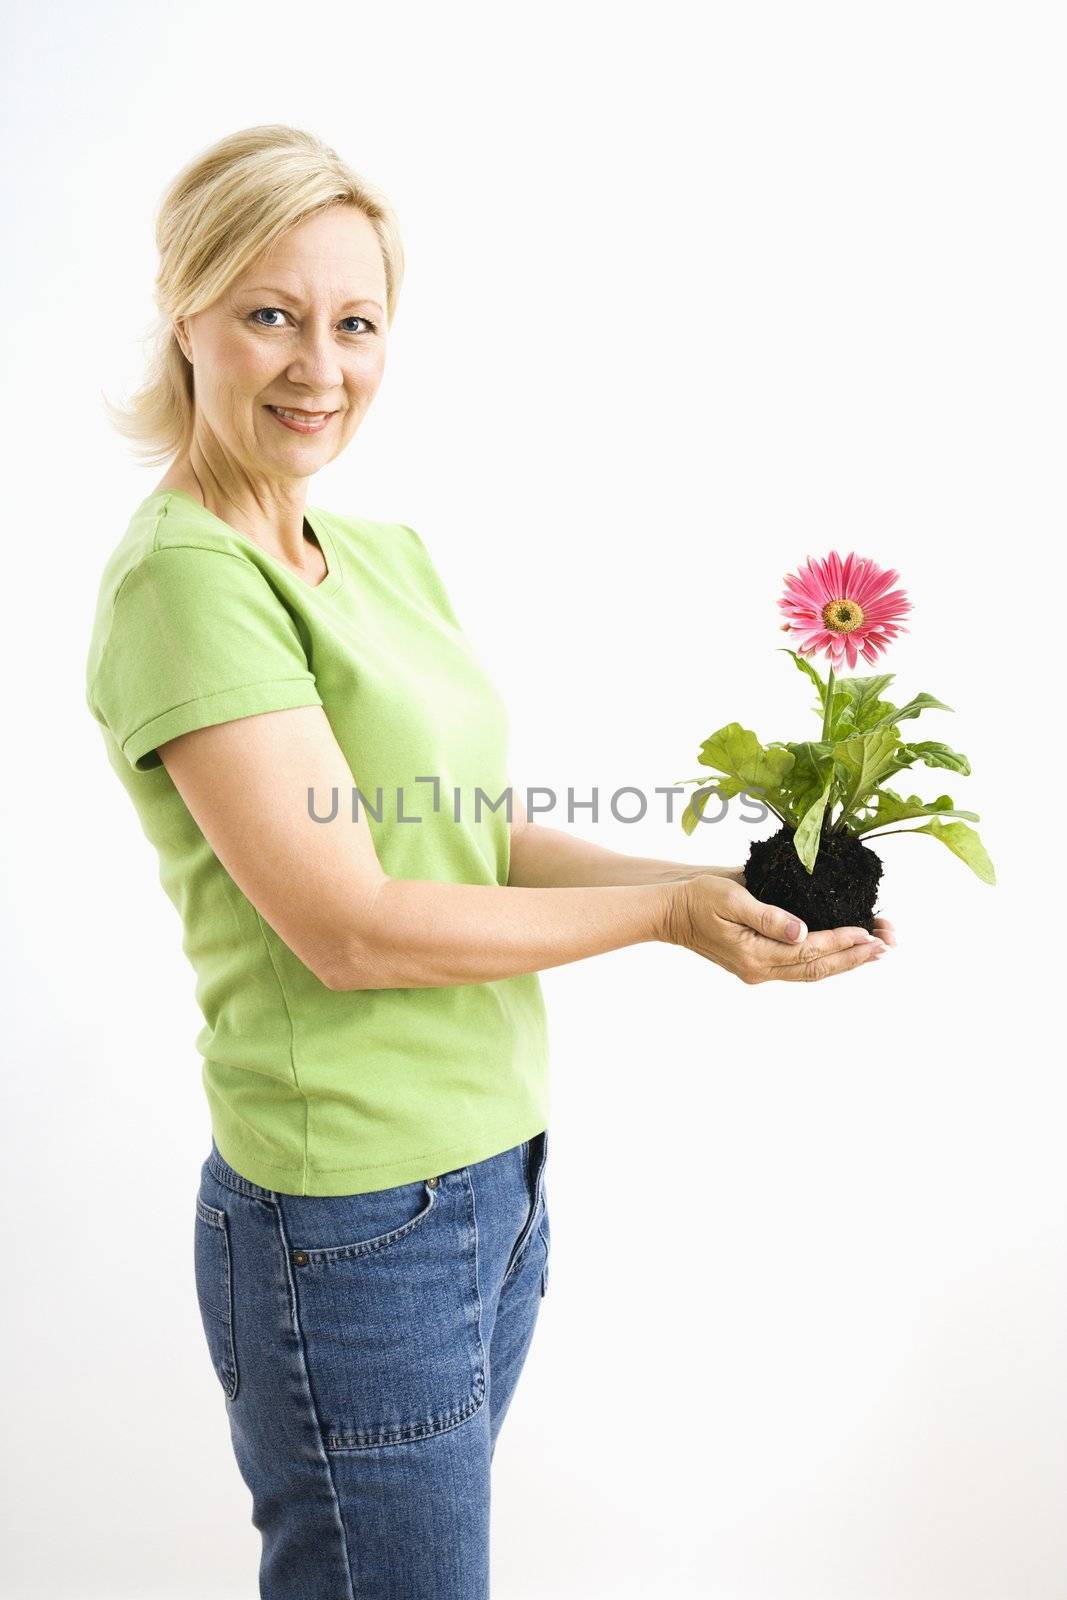 Side view of smiling adult blonde woman standing holding pink gerber daisy plant.